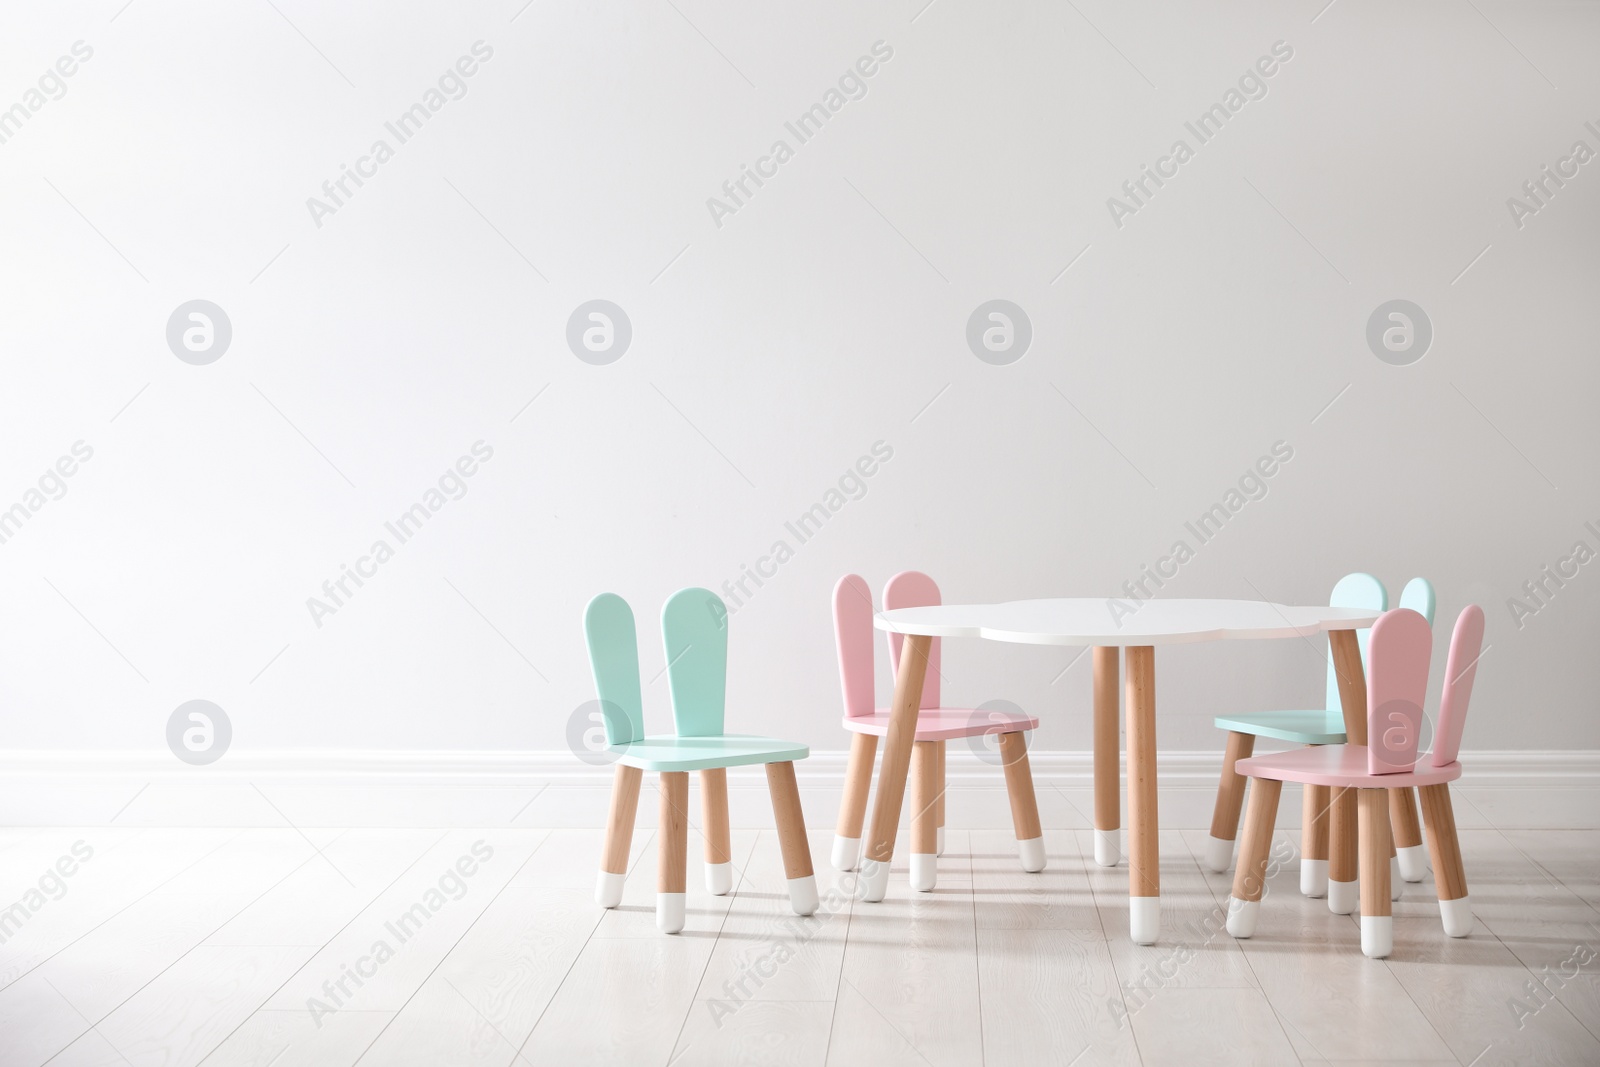 Photo of Small table and chairs with bunny ears near white wall indoors, space for text. Children's room interior